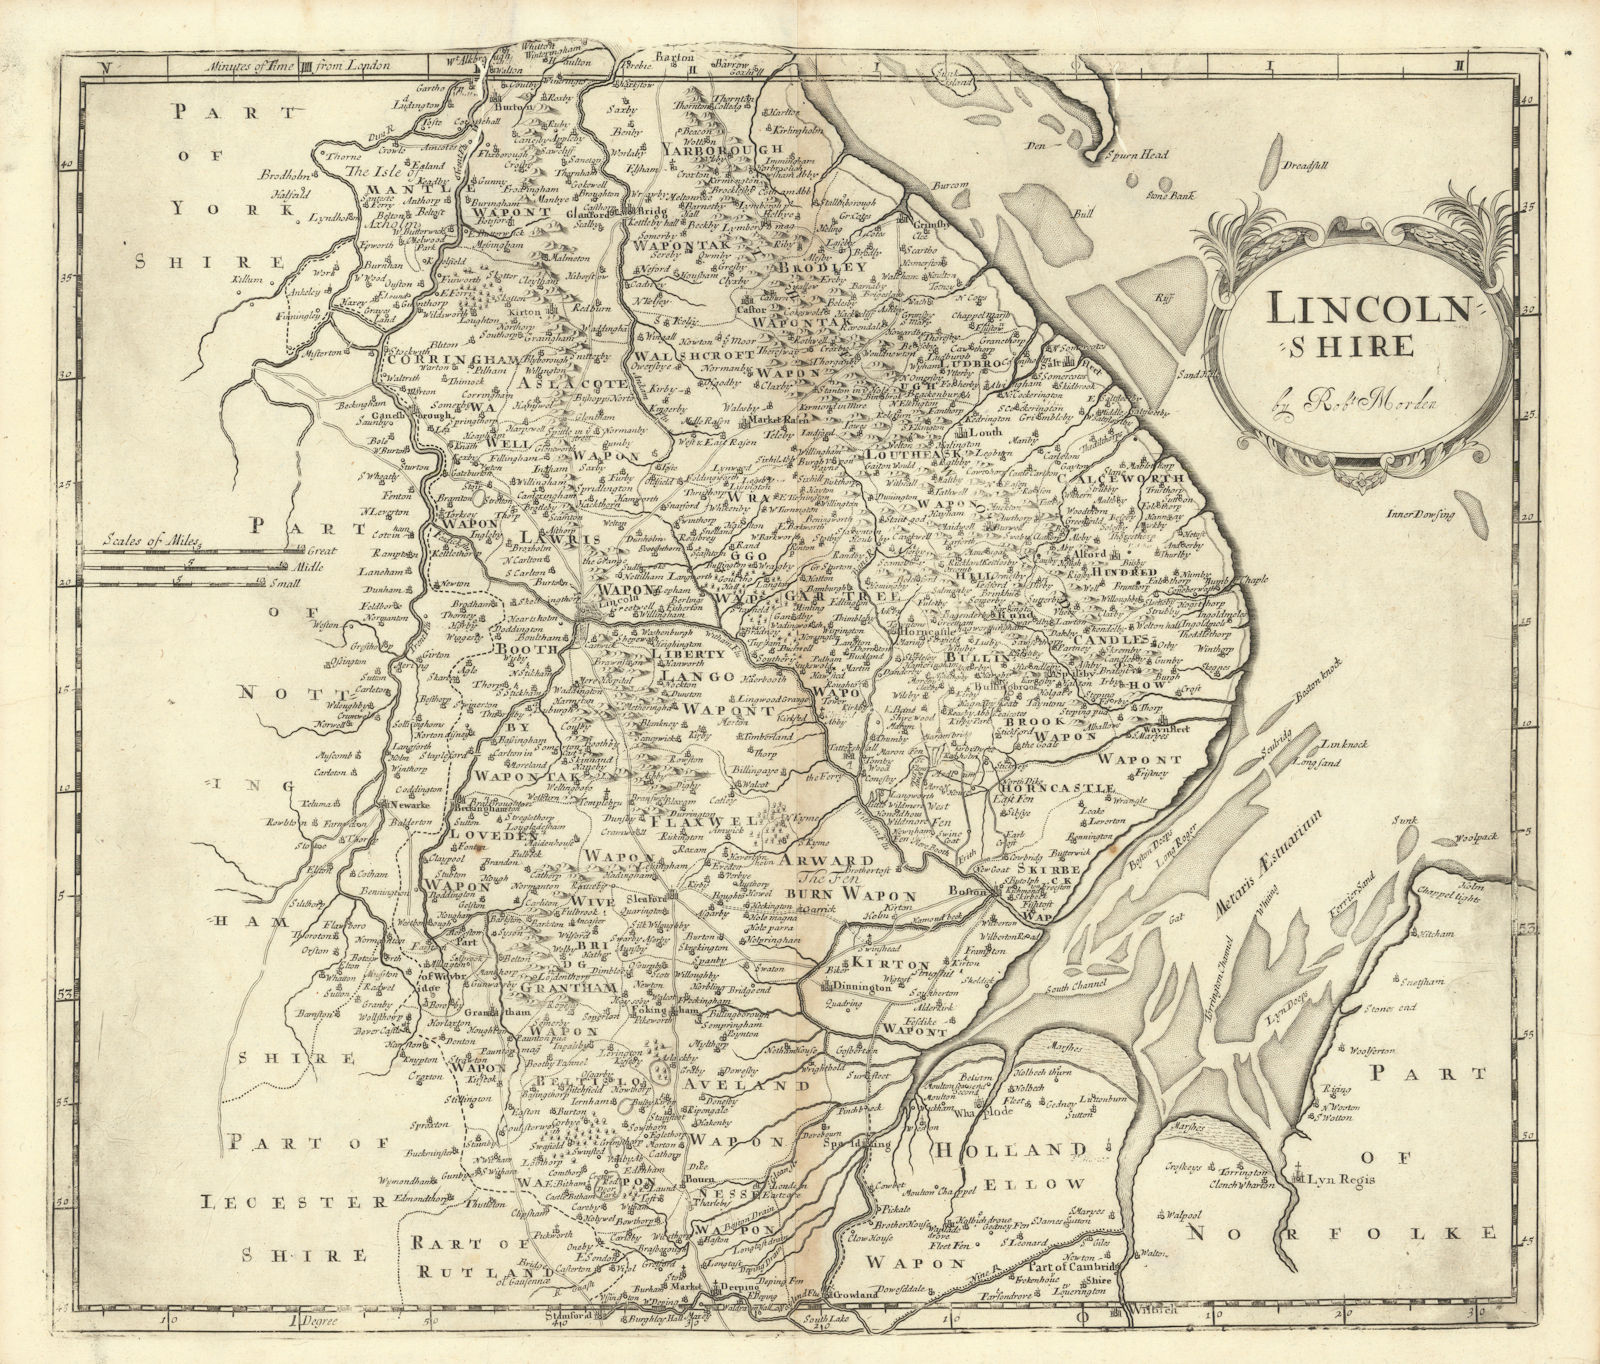 Lincolnshire. 'LINCOLN SHIRE' by ROBERT MORDEN from Camden's Britannia 1695 map